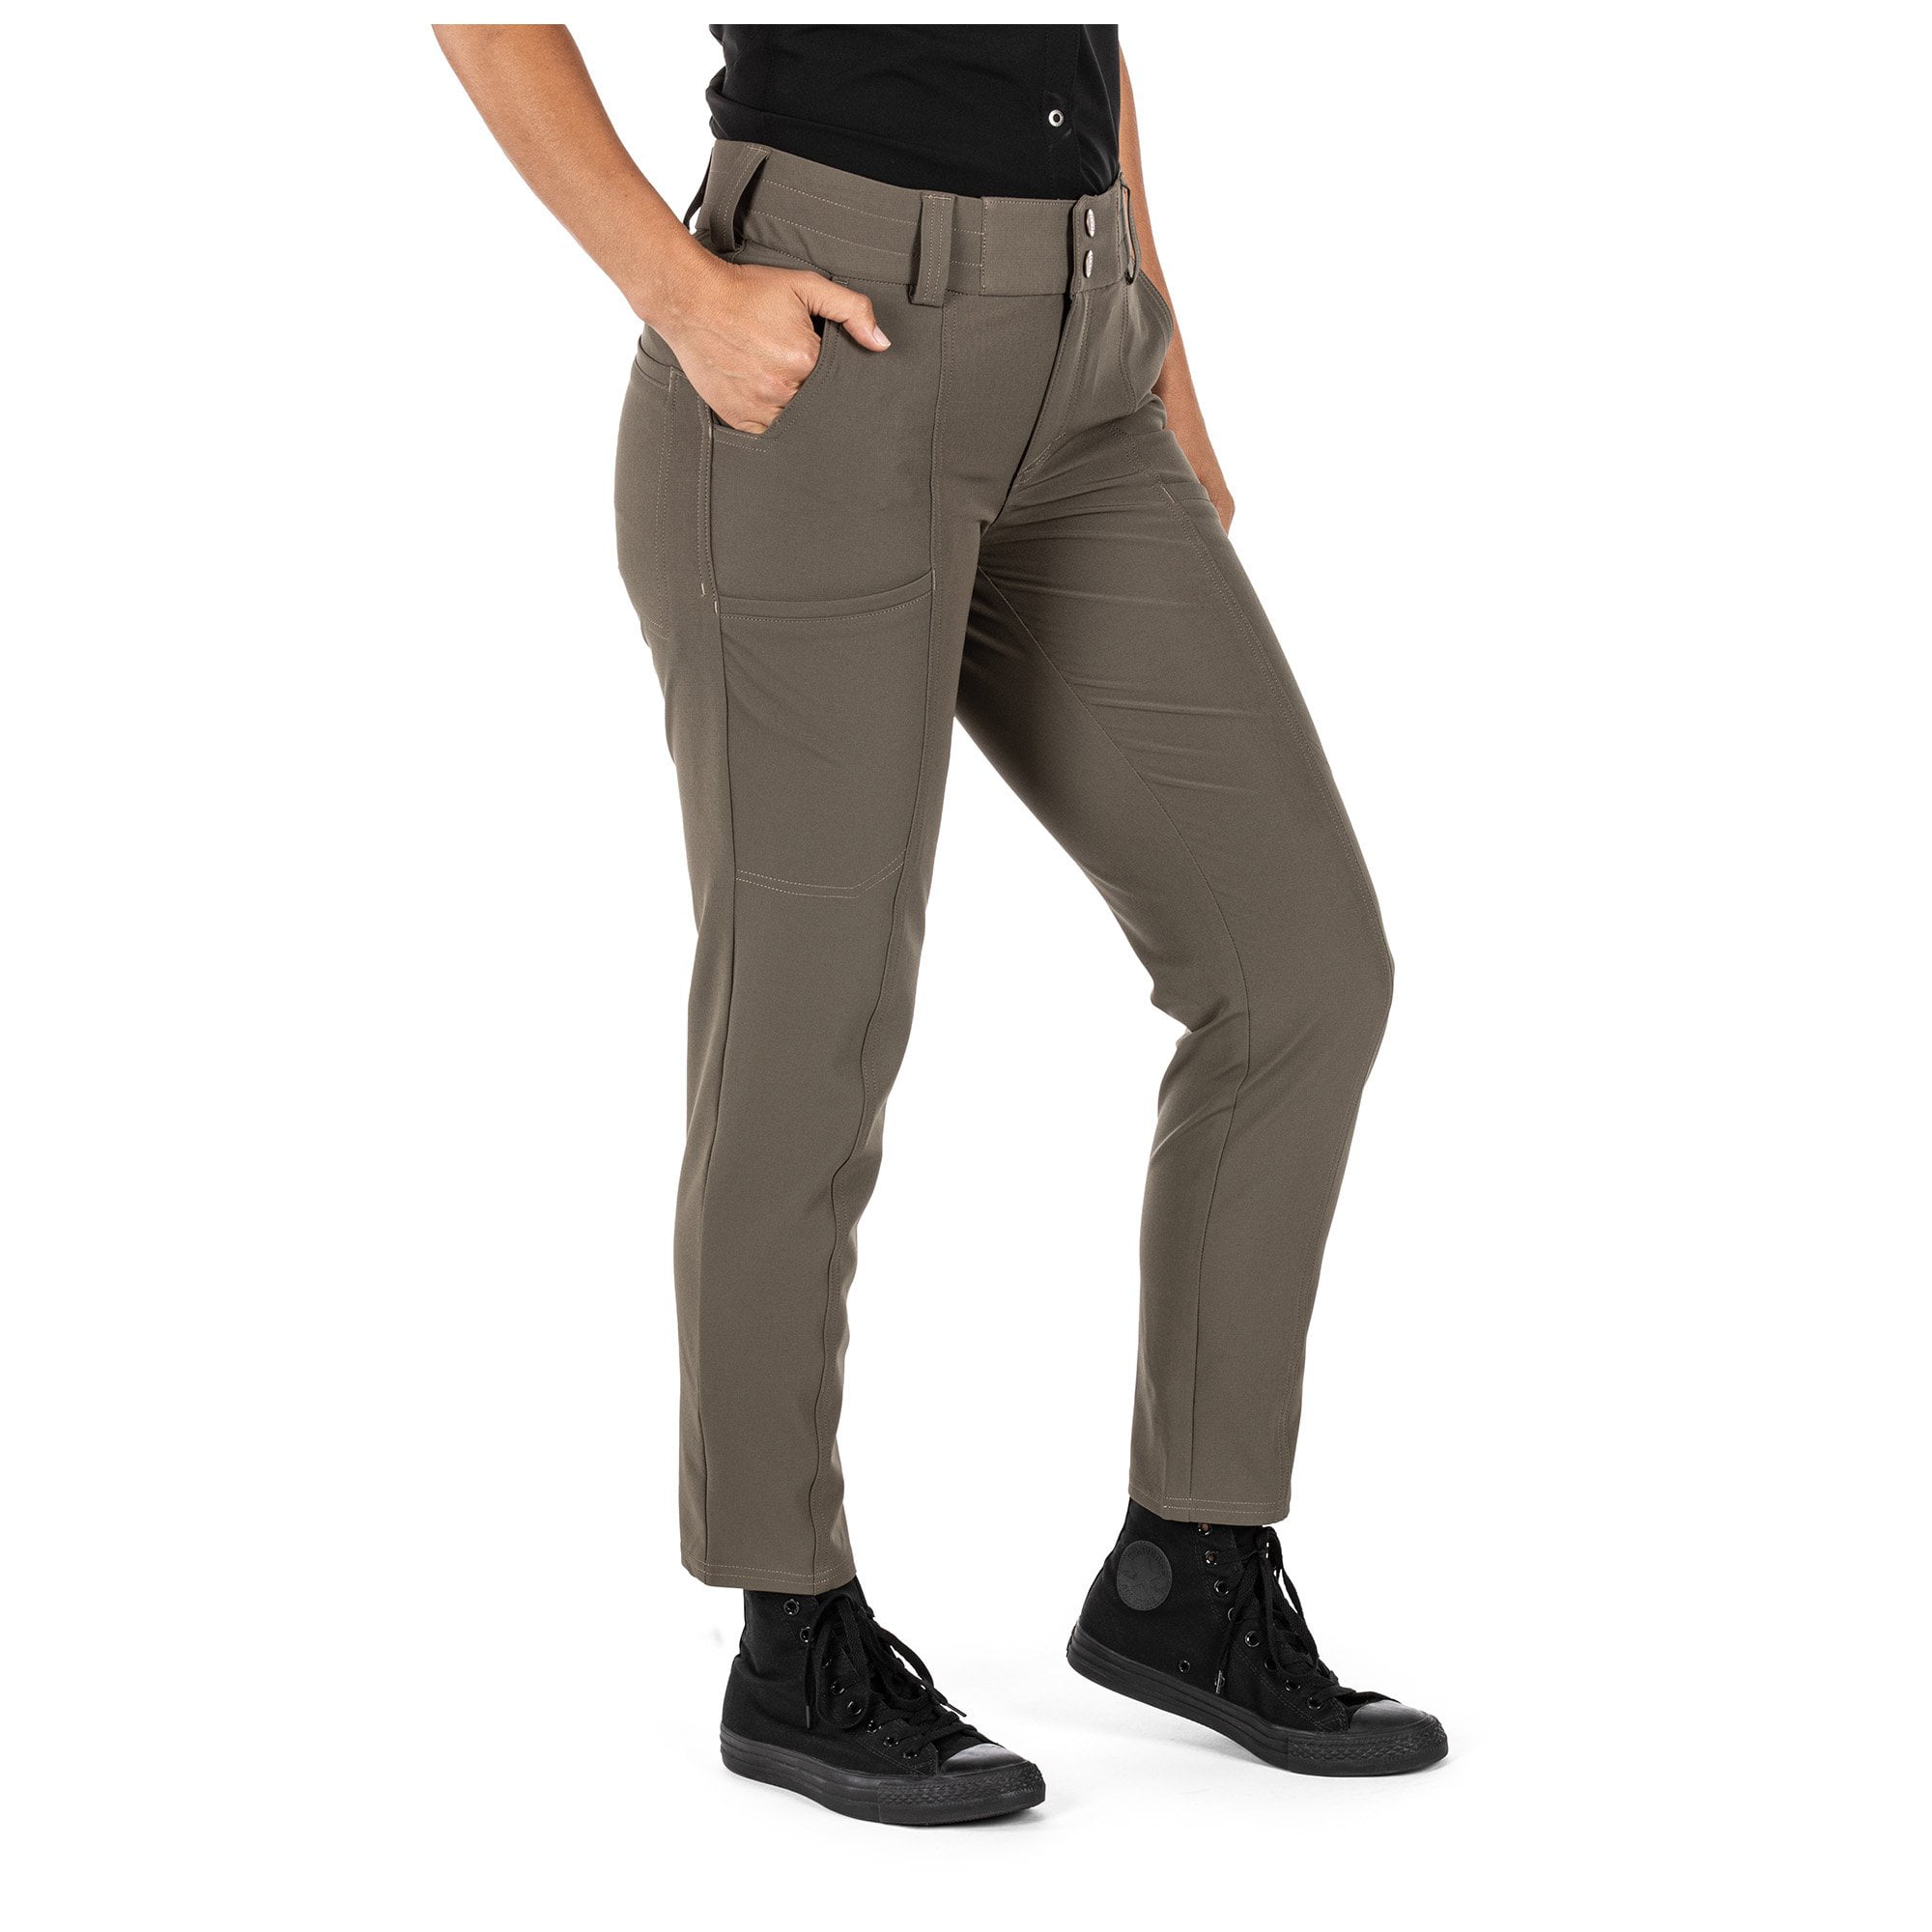 Style 64441 Details about   5.11 Tactical Women's 8-Pocket Functional Cargo Vista Pant 